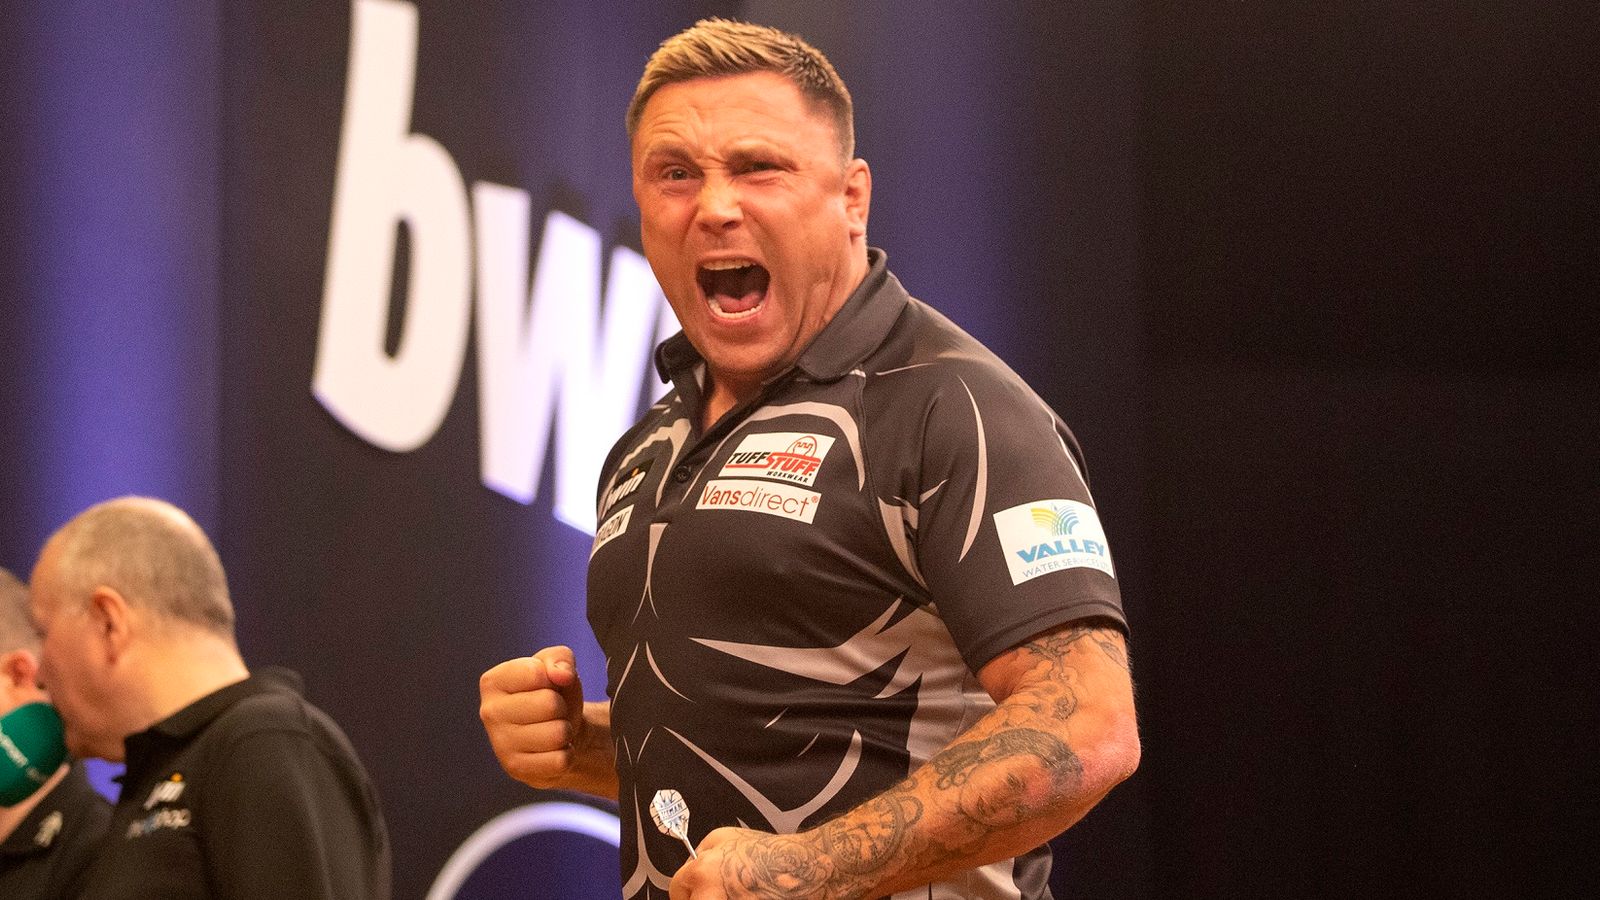 Gerwyn Price says he has the best Agame after his World Series triumph